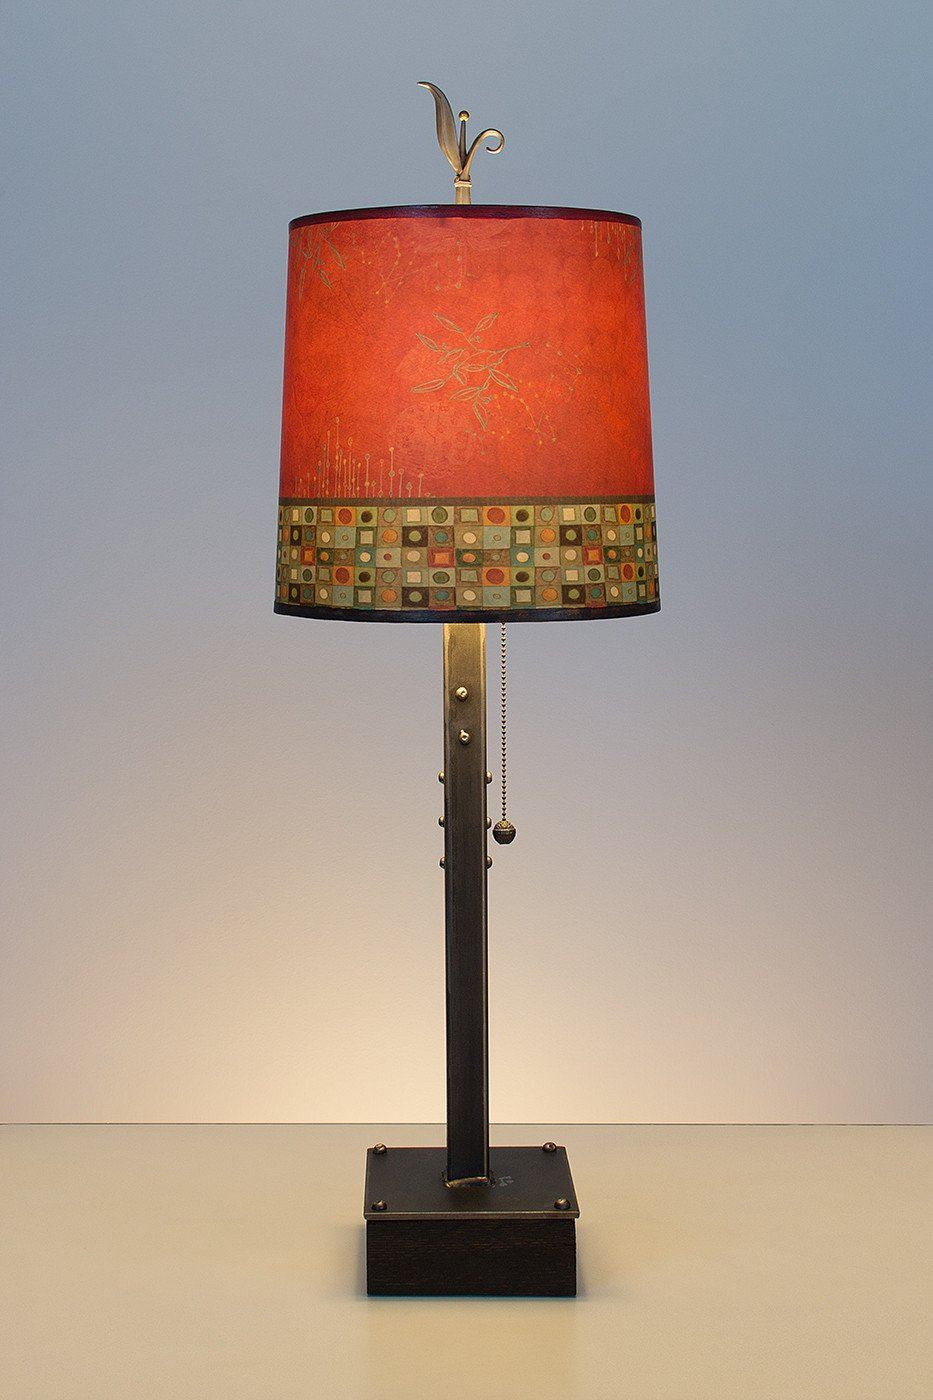 Janna Ugone & Co Table Lamps Steel Table Lamp on Wood with Medium Drum Shade in Red Mosaic